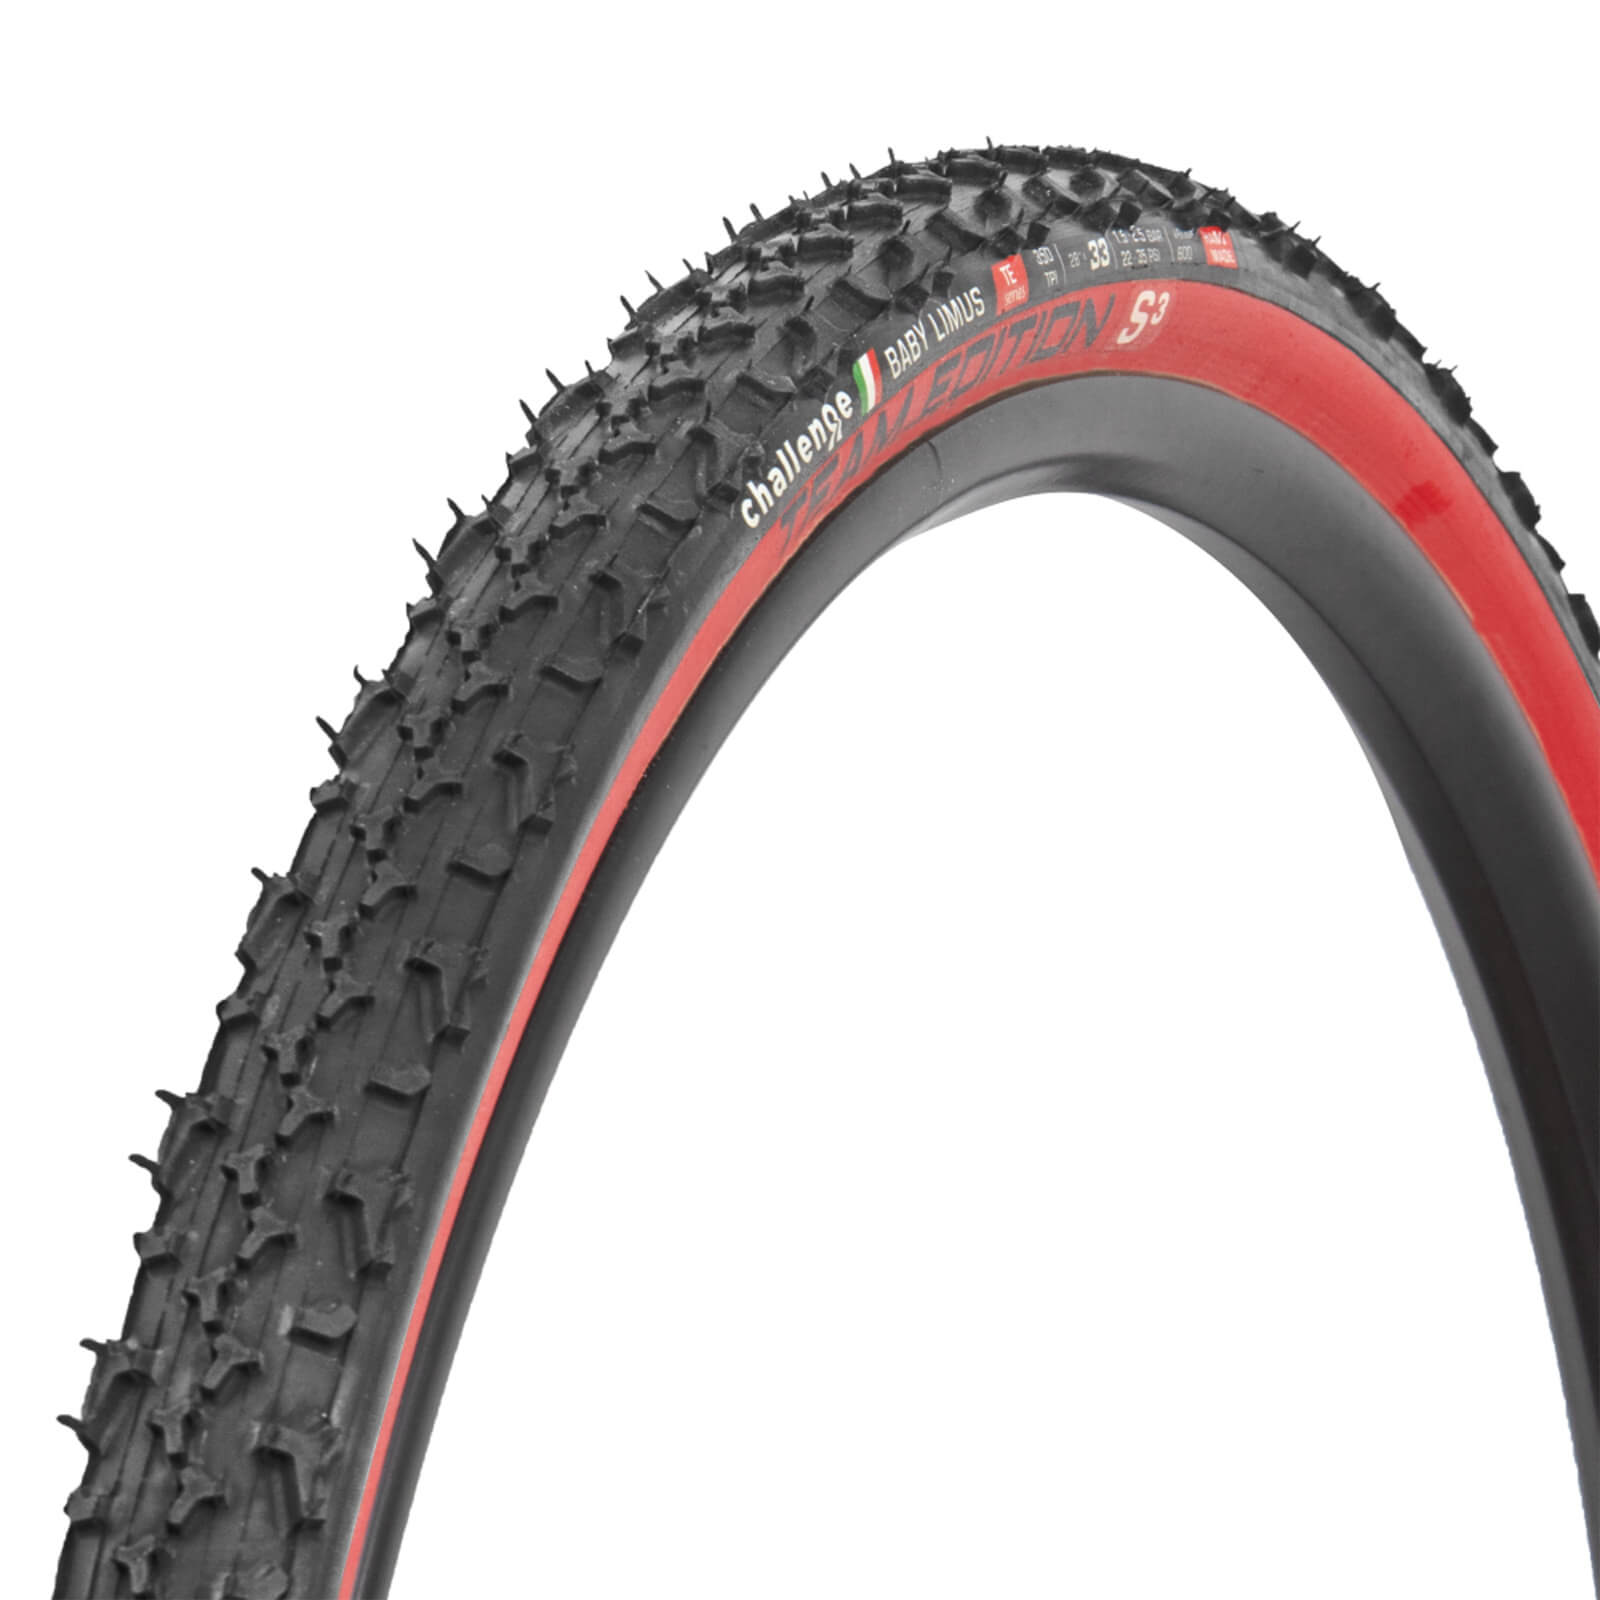 Challenge Baby Limus-TE Special Edition Handmade Tubular CX Tyre - 700x33c - Red